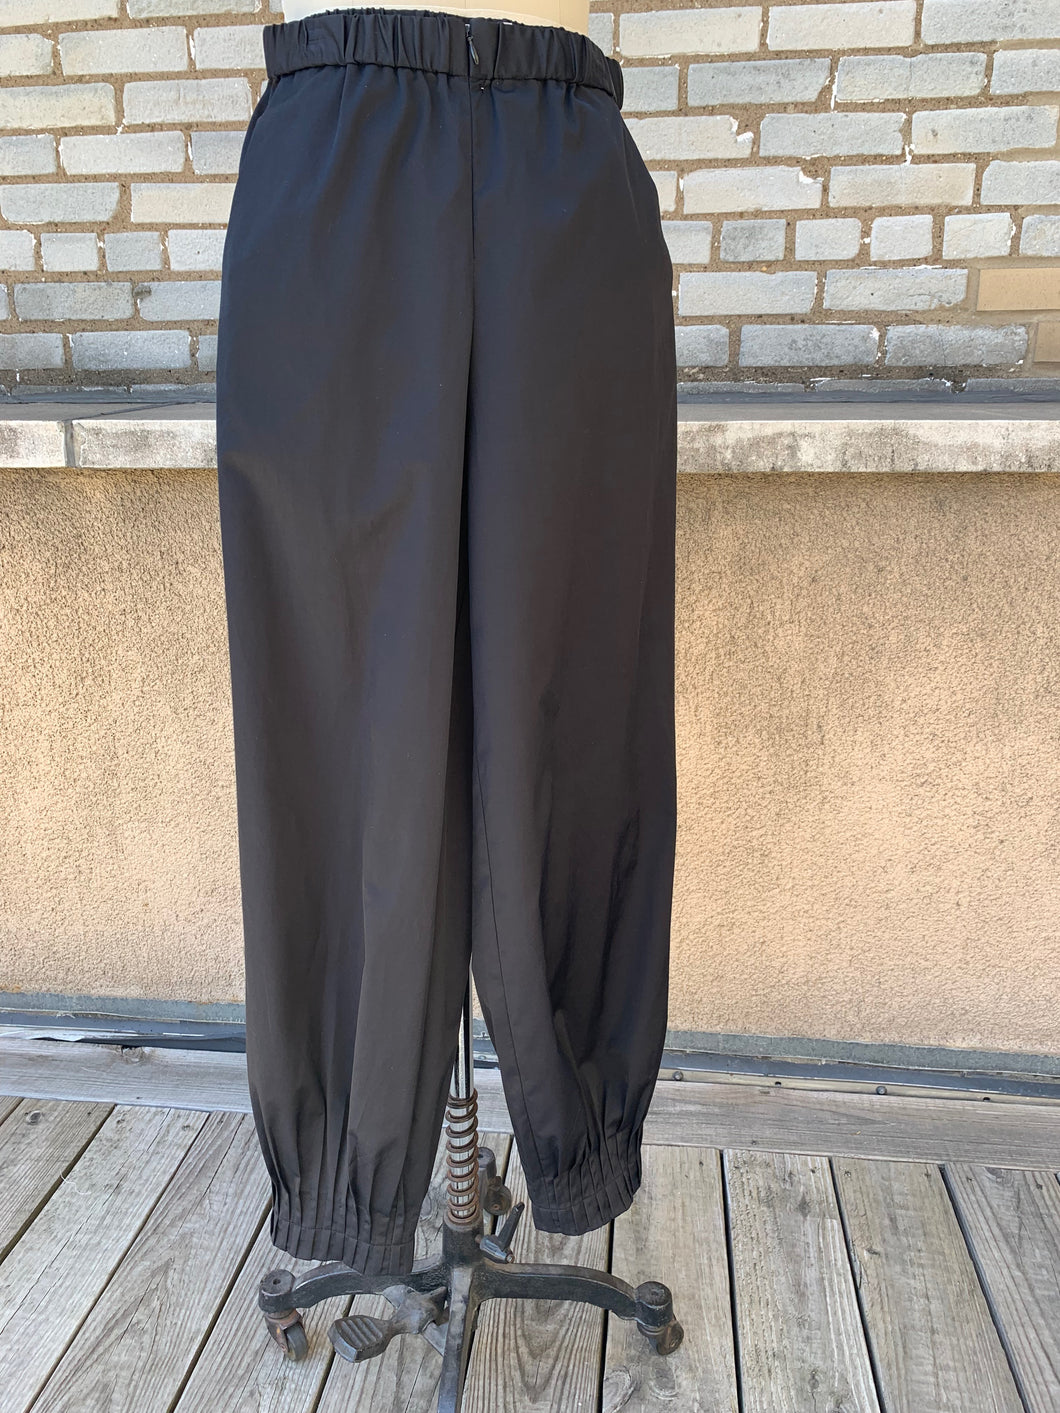 Made in NYC Dancer Pants (Black)